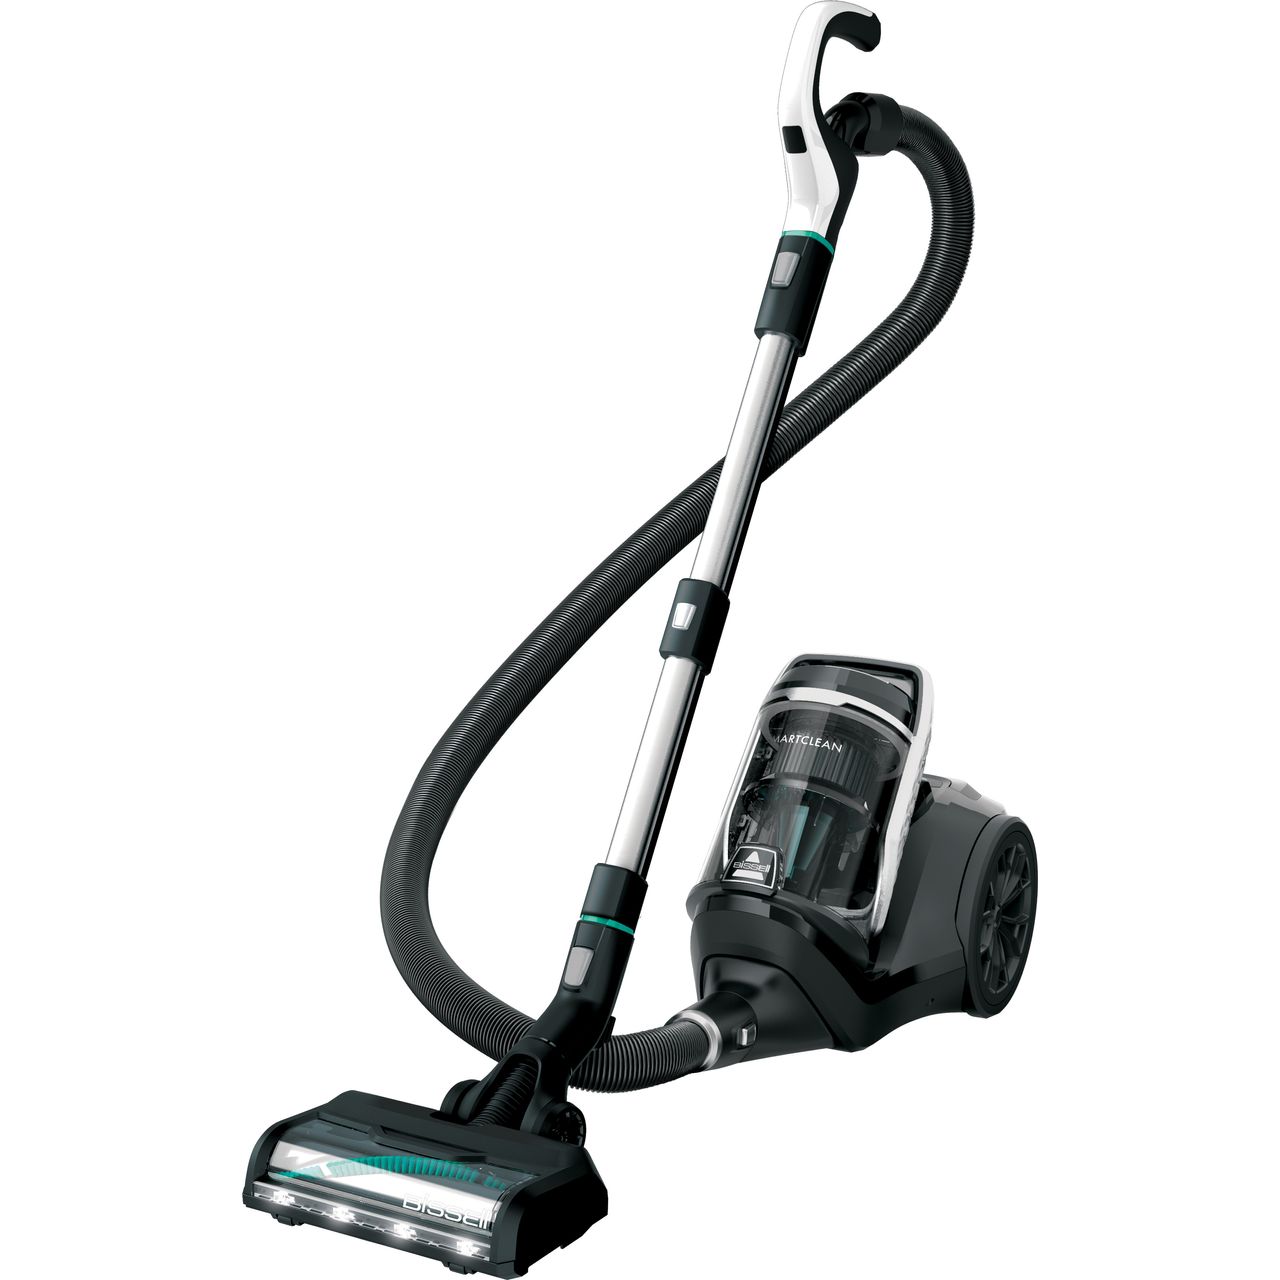 Bissell SmartClean Pet 2228A Cylinder Vacuum Cleaner Review